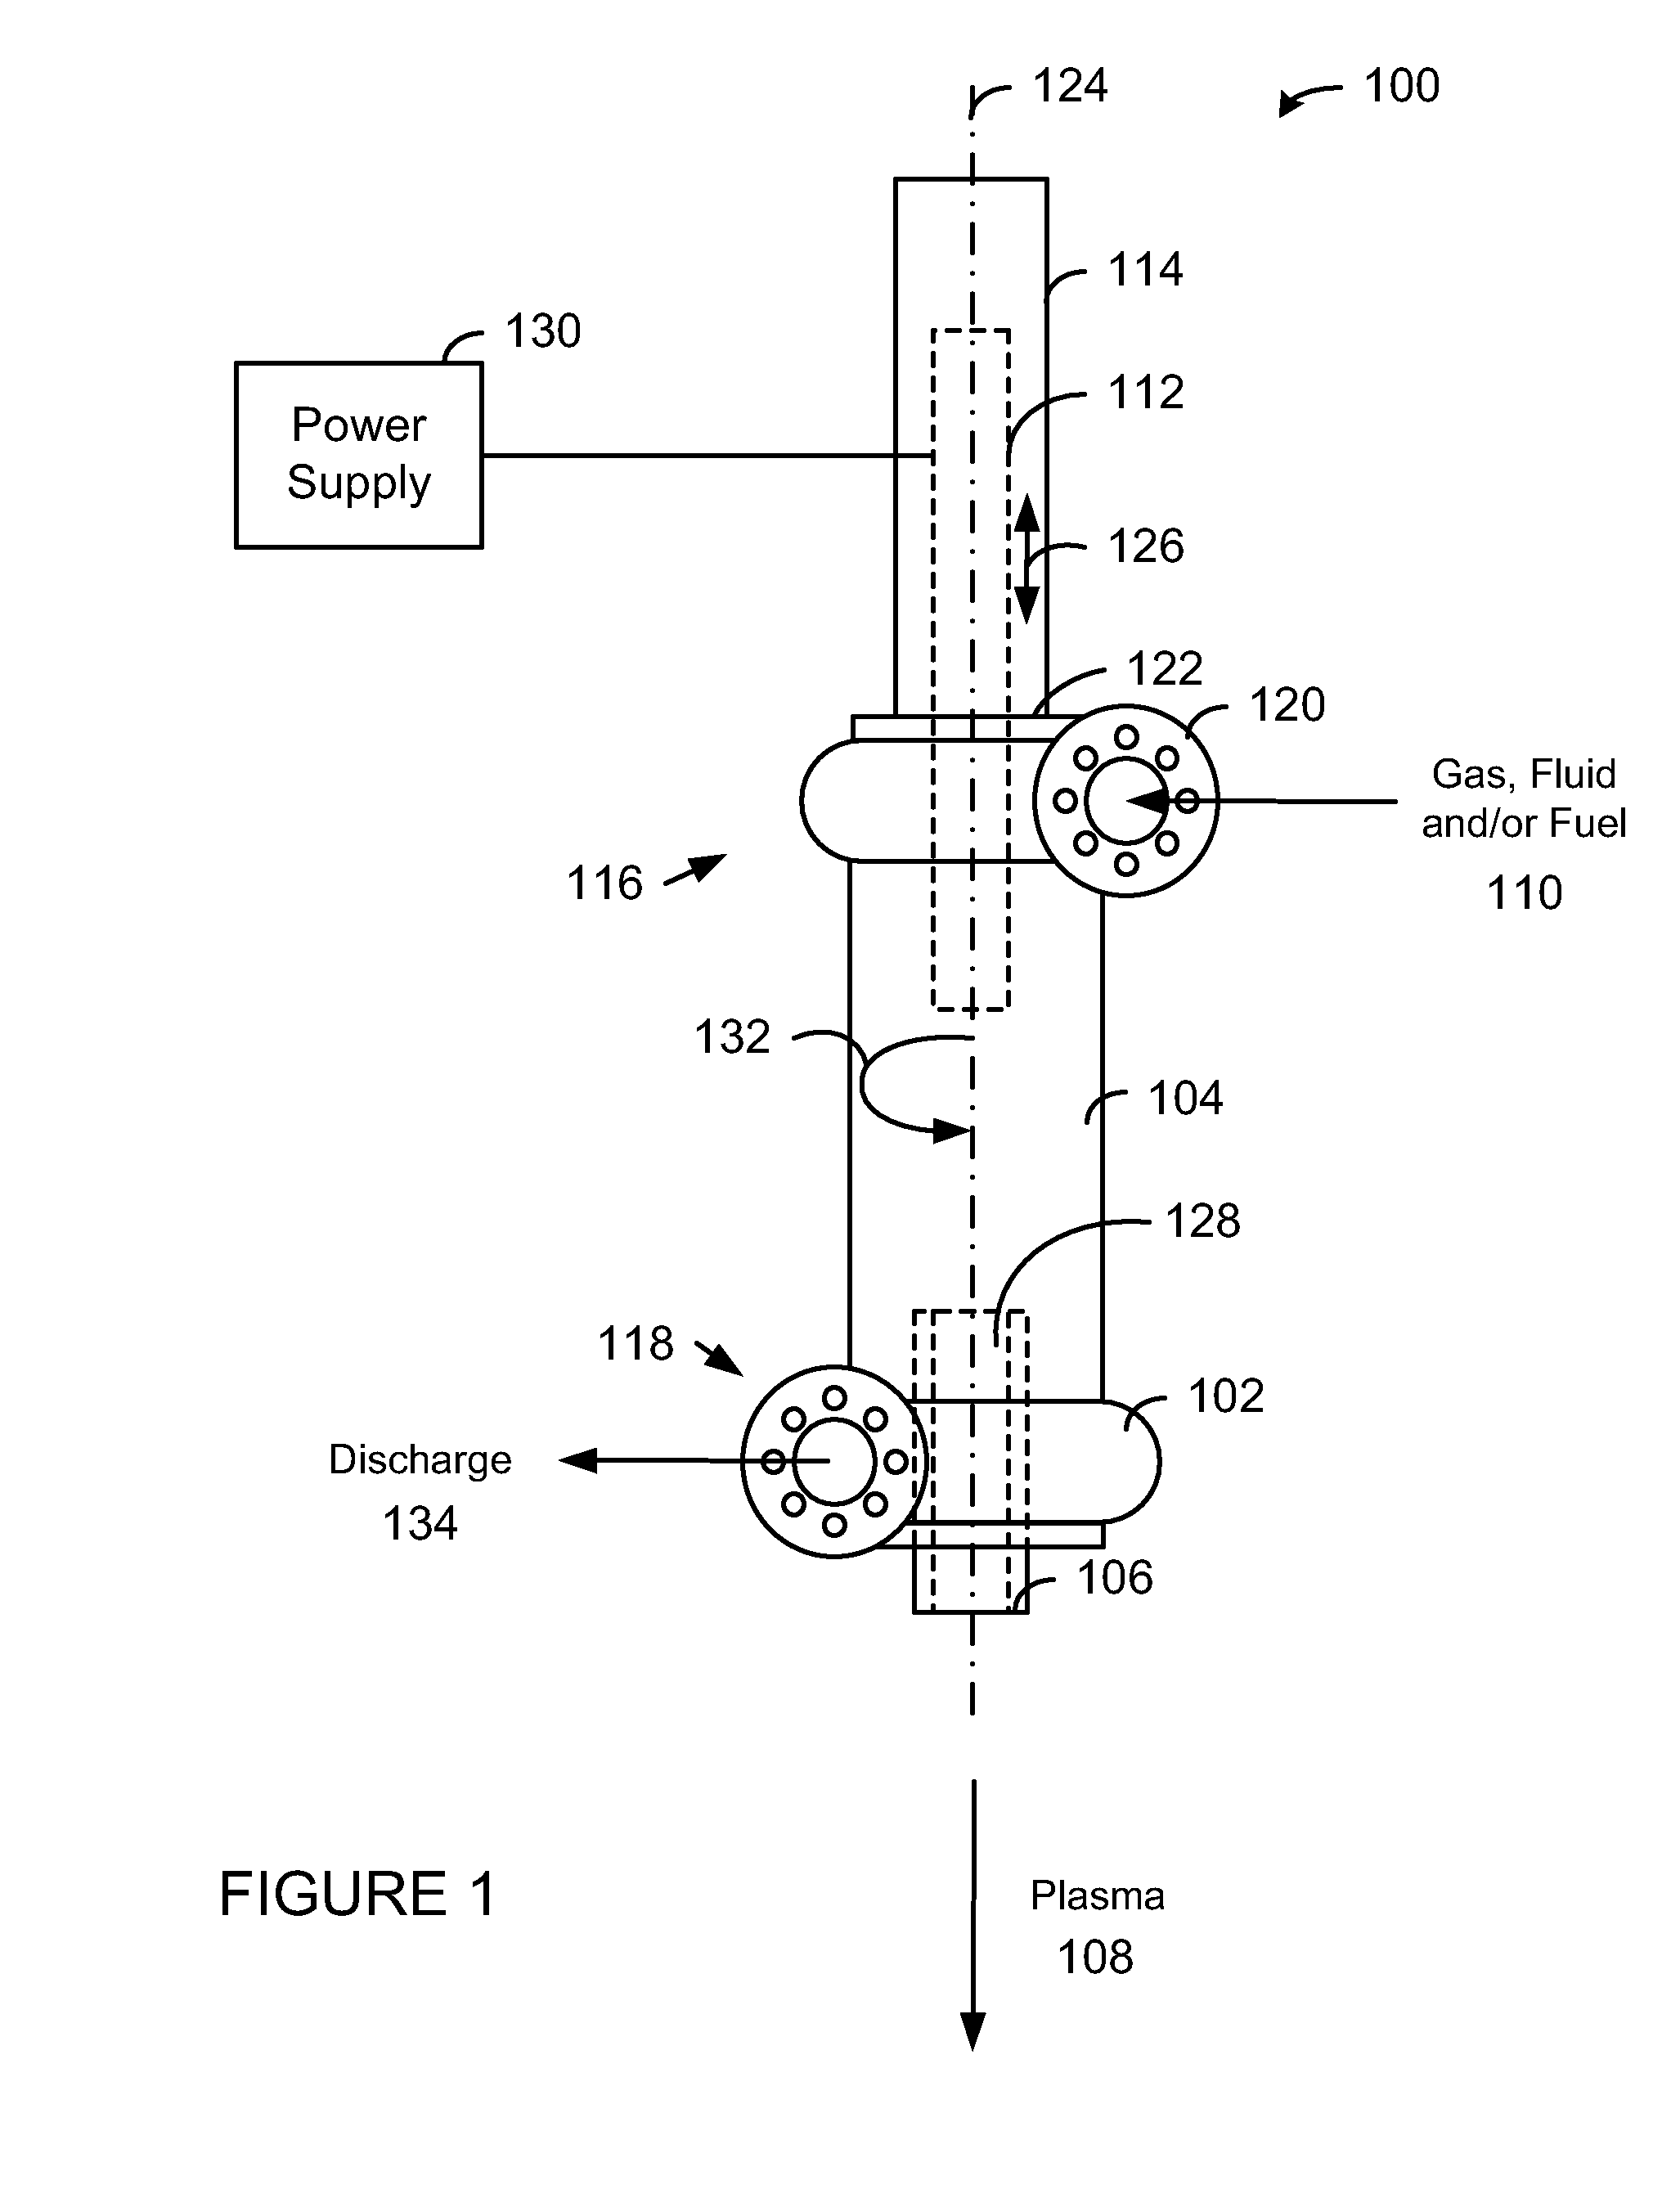 System, method and apparatus for lean combustion with plasma from an electrical arc